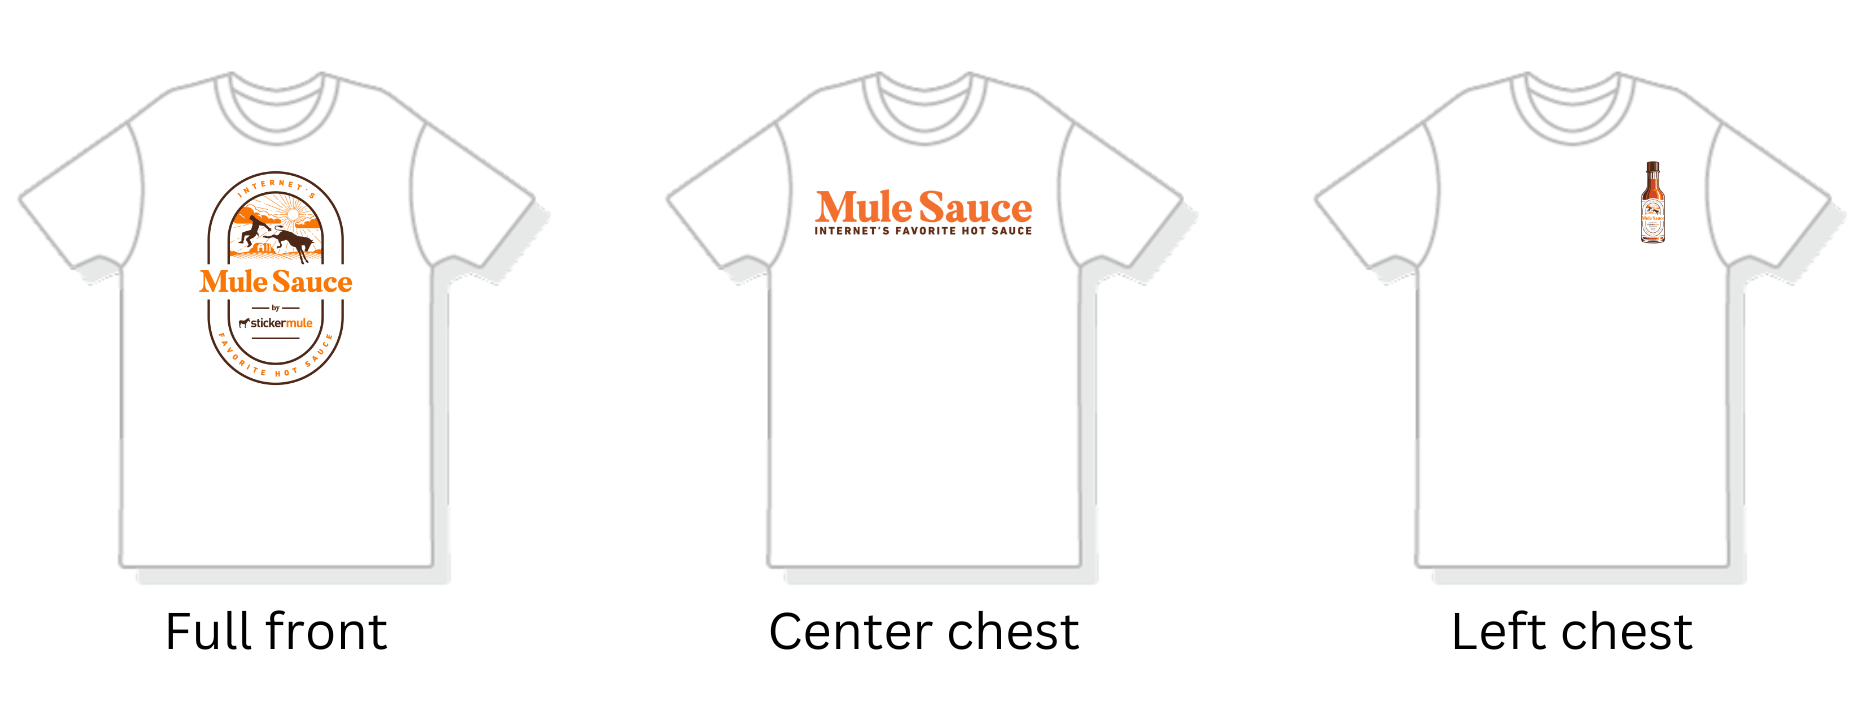 custom t-shirts with designs printed in different locations like full front, center chest, and left chest